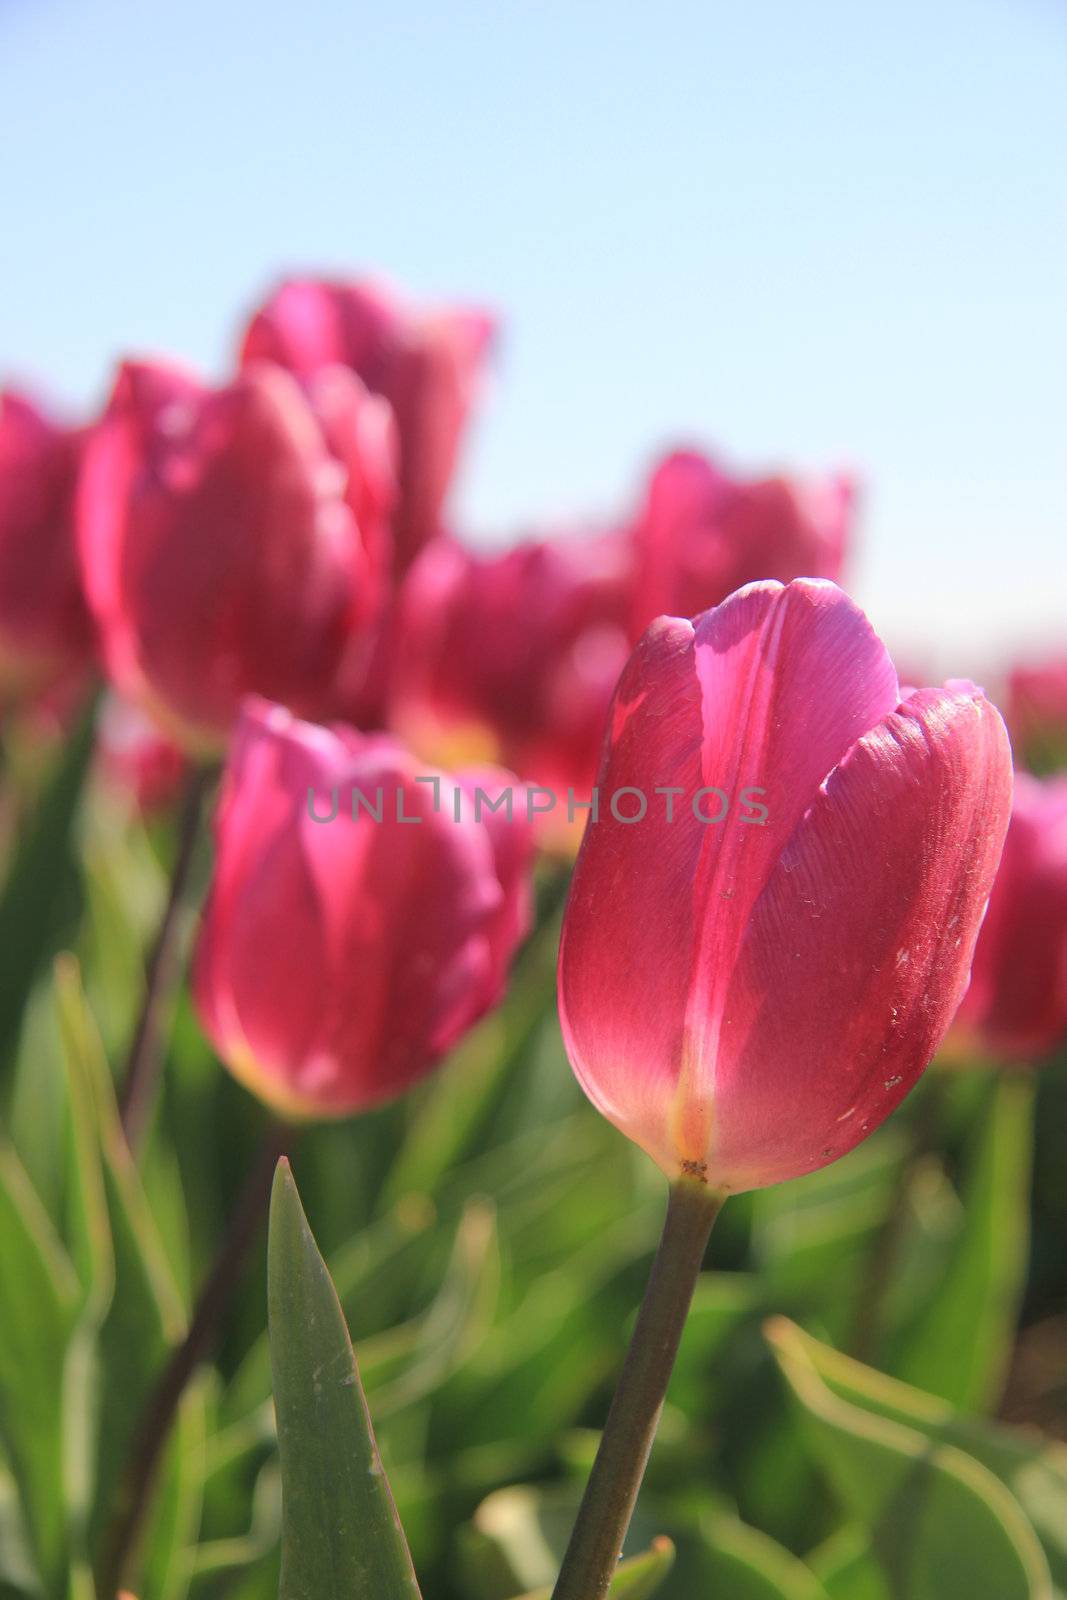 purple pink tulips in the sunlight against a clear blue sky